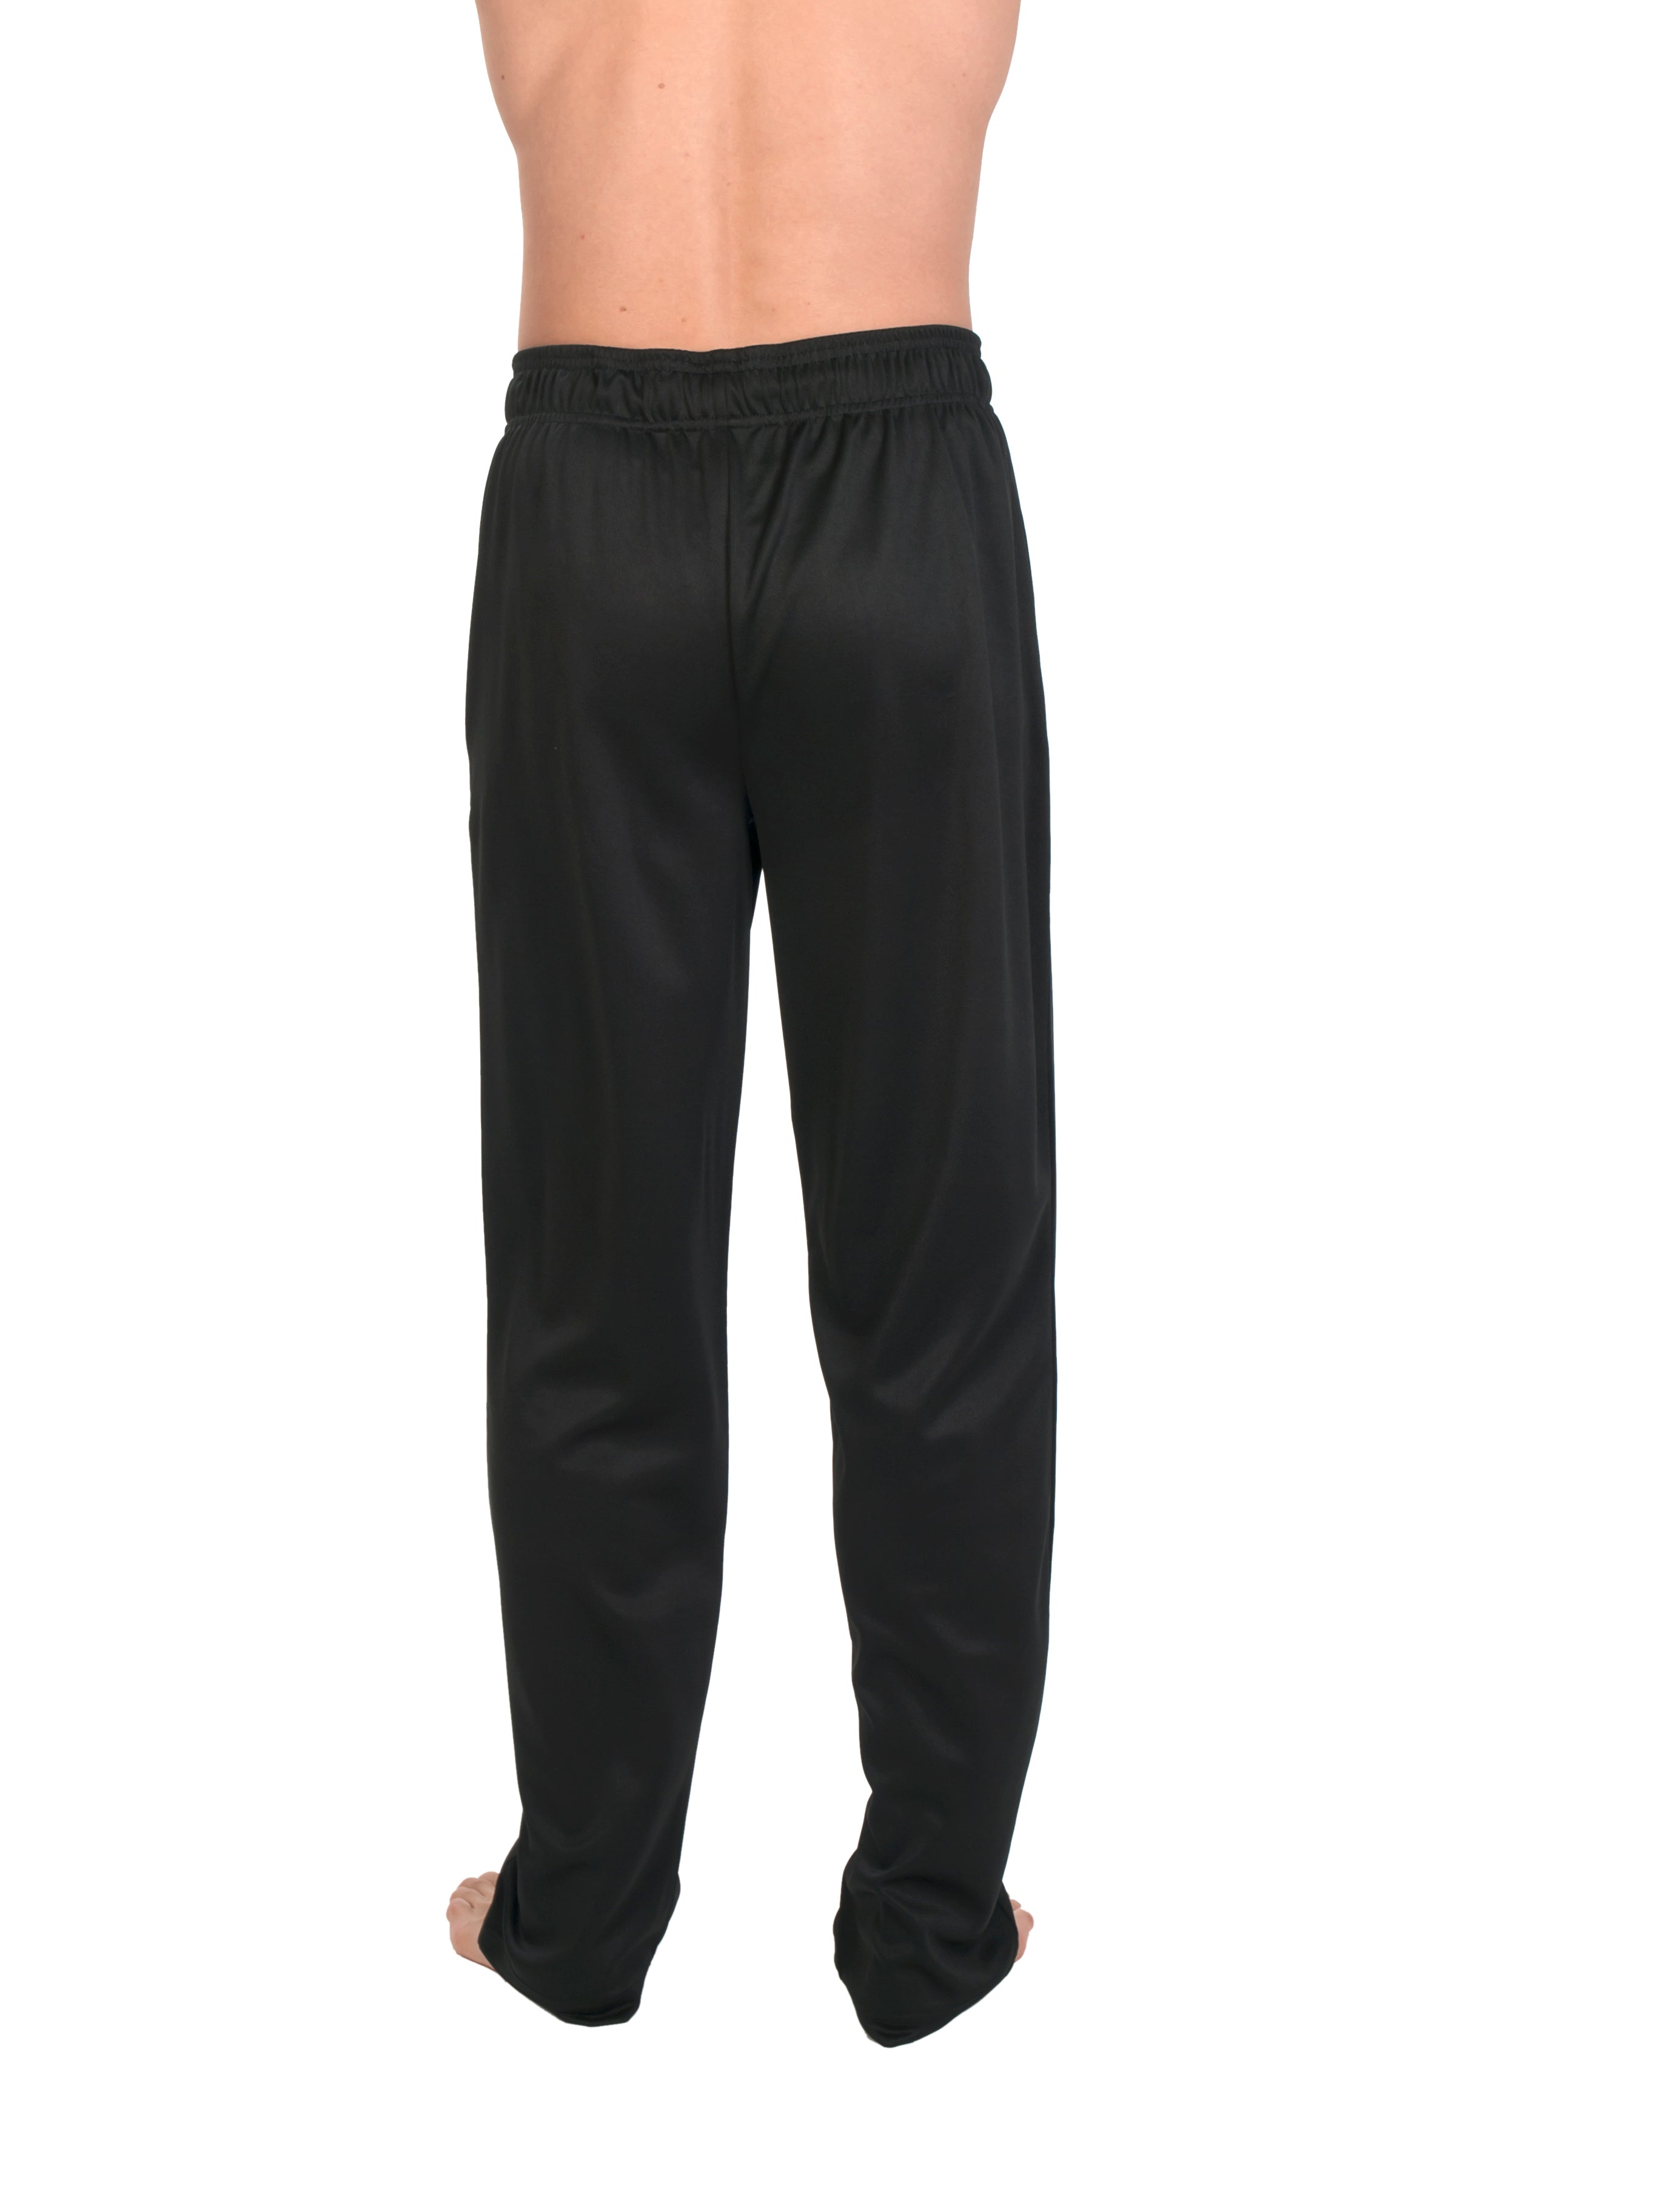 Big And Tall Work Out Elastic Waist Pant